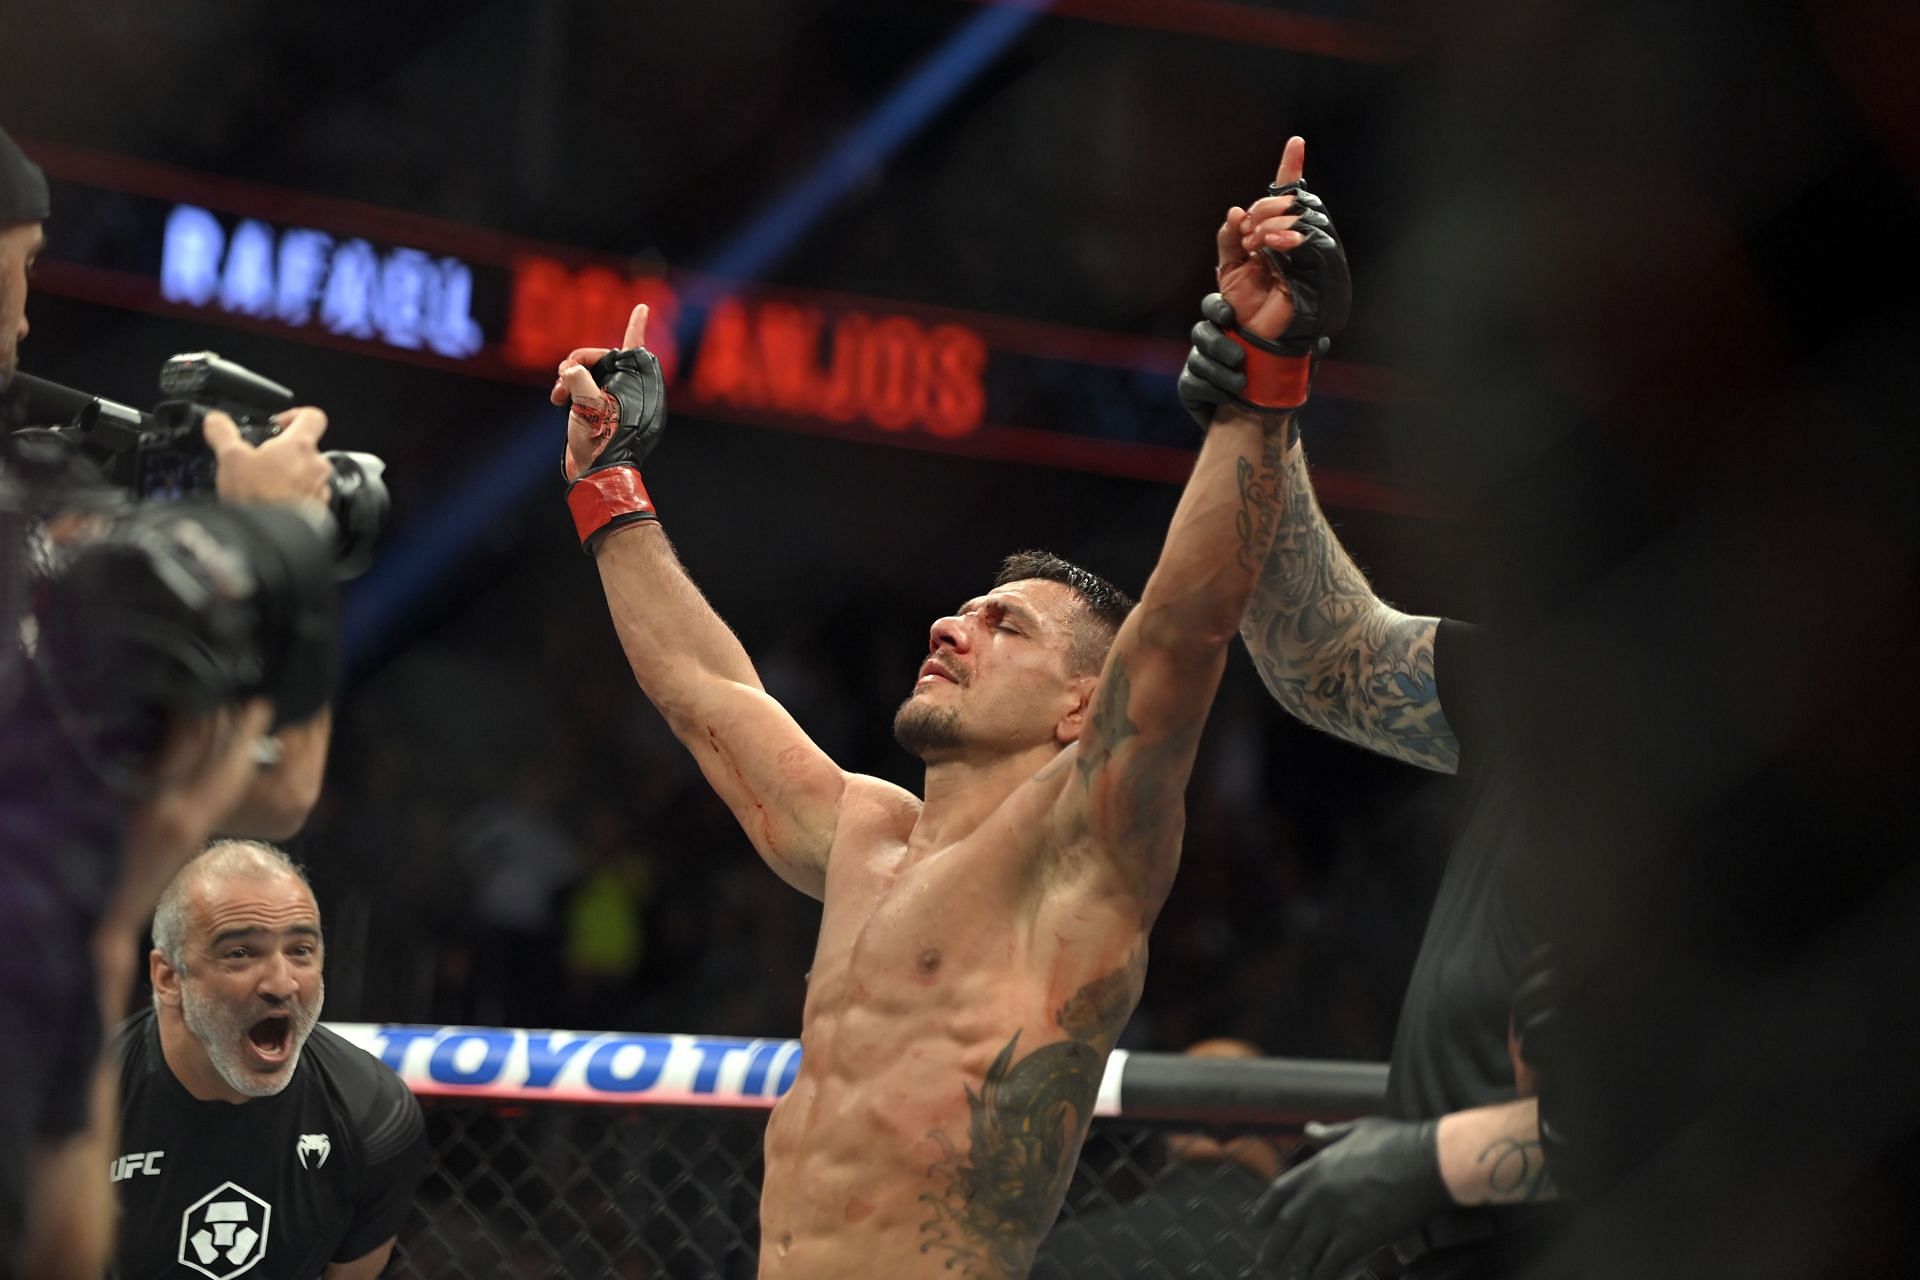 Rafael Dos Anjos missed out on his opportunity to fight Conor McGregor in 2016